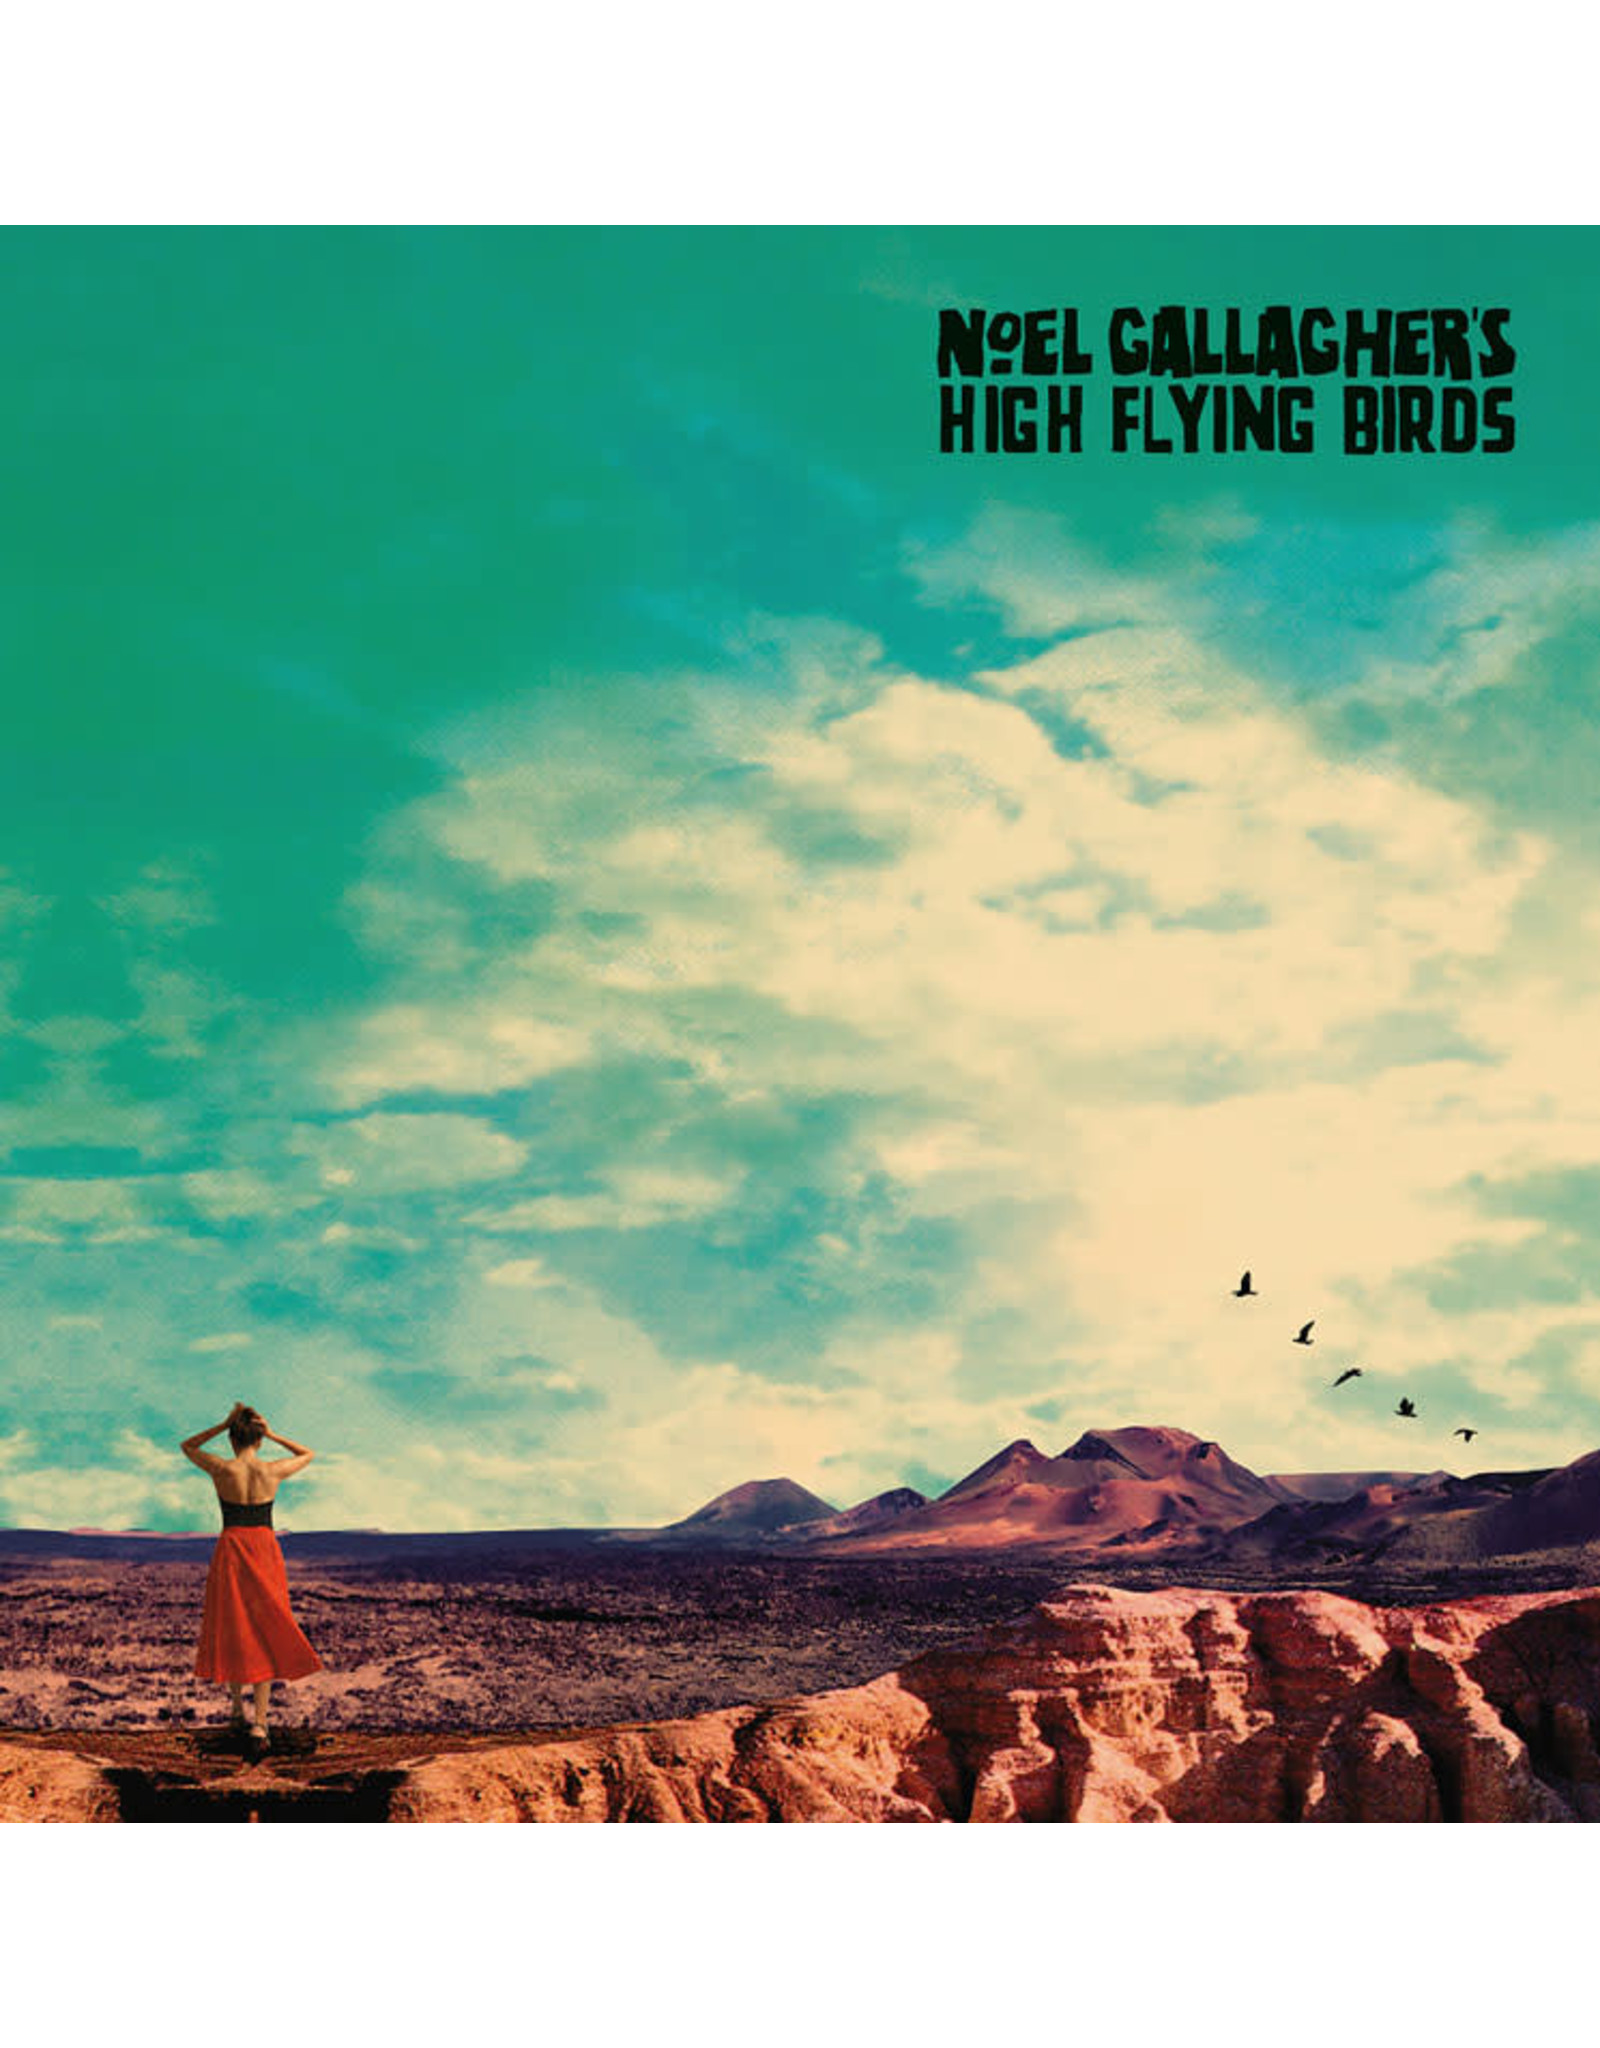 Noel Gallagher's High Flying Birds - Who Built The Moon